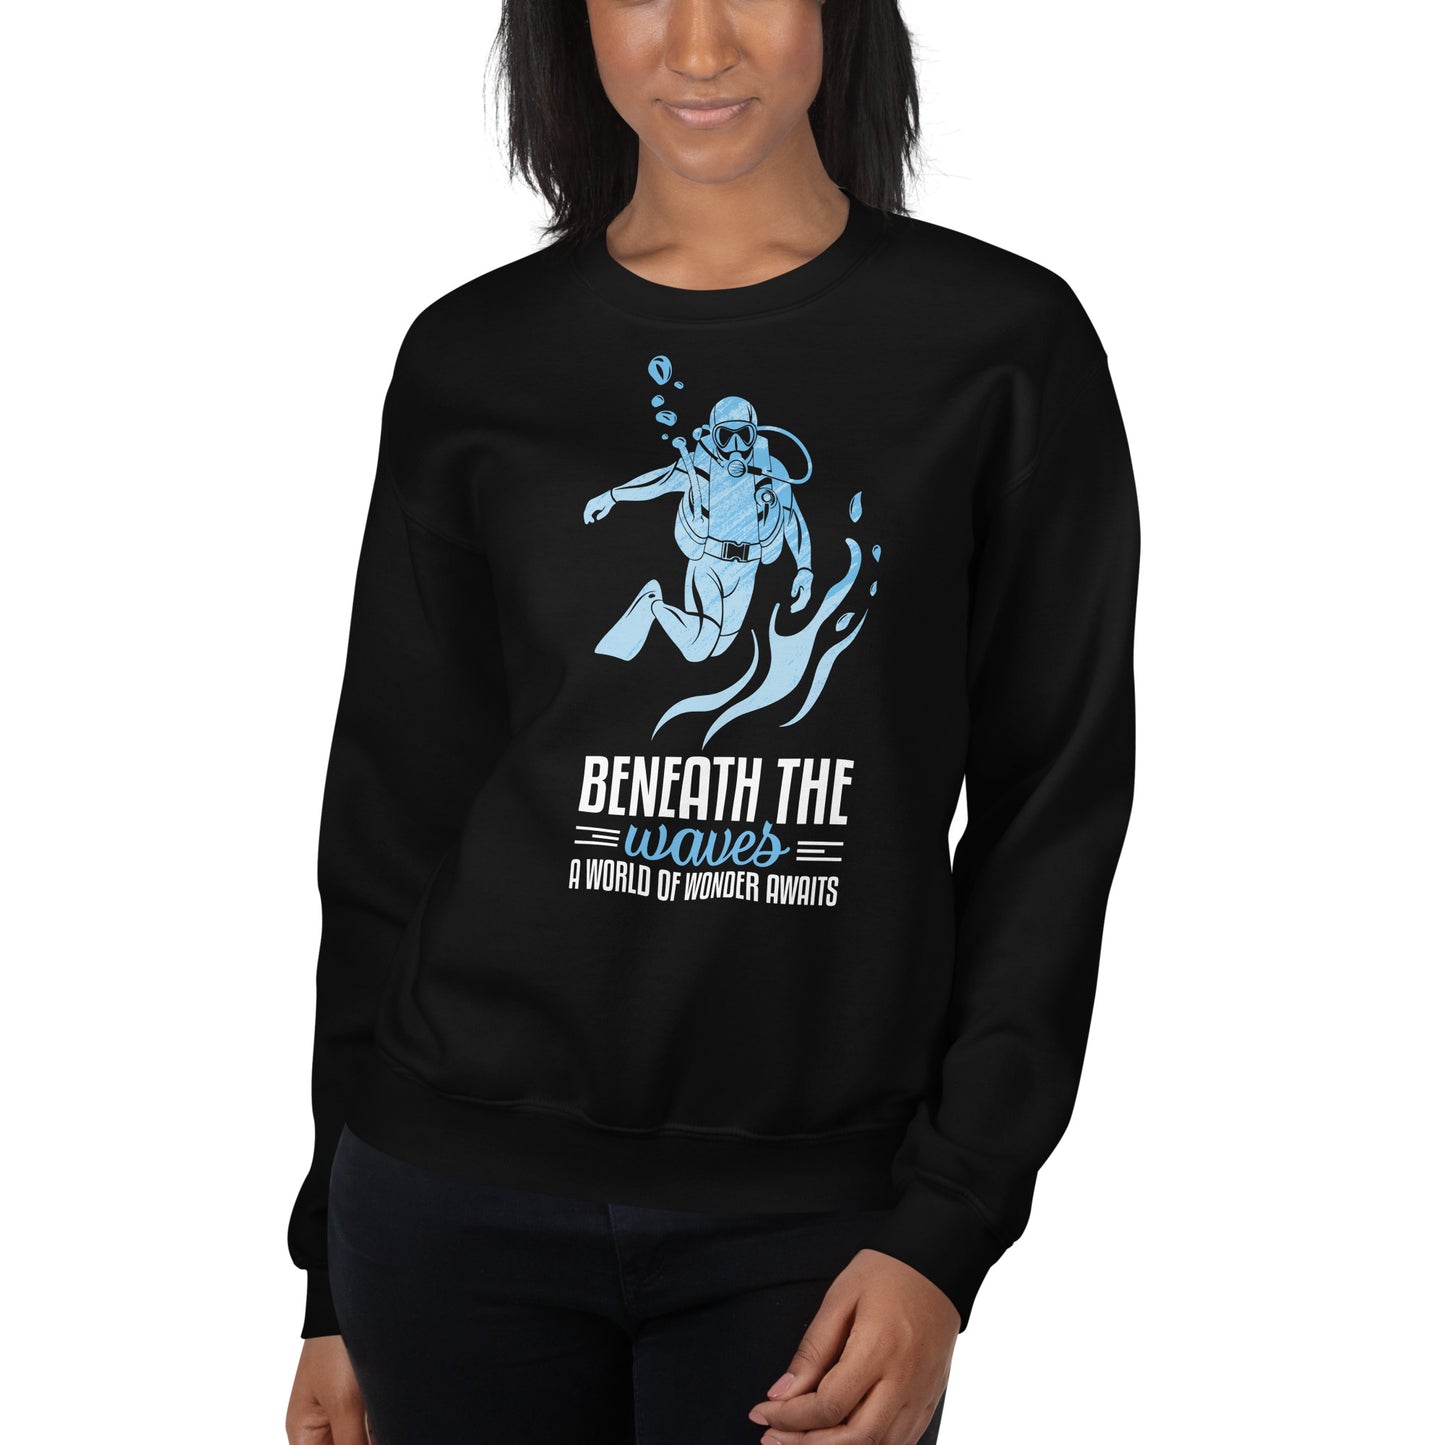 Beneath the Waves a World of Wonder awaits Pullover